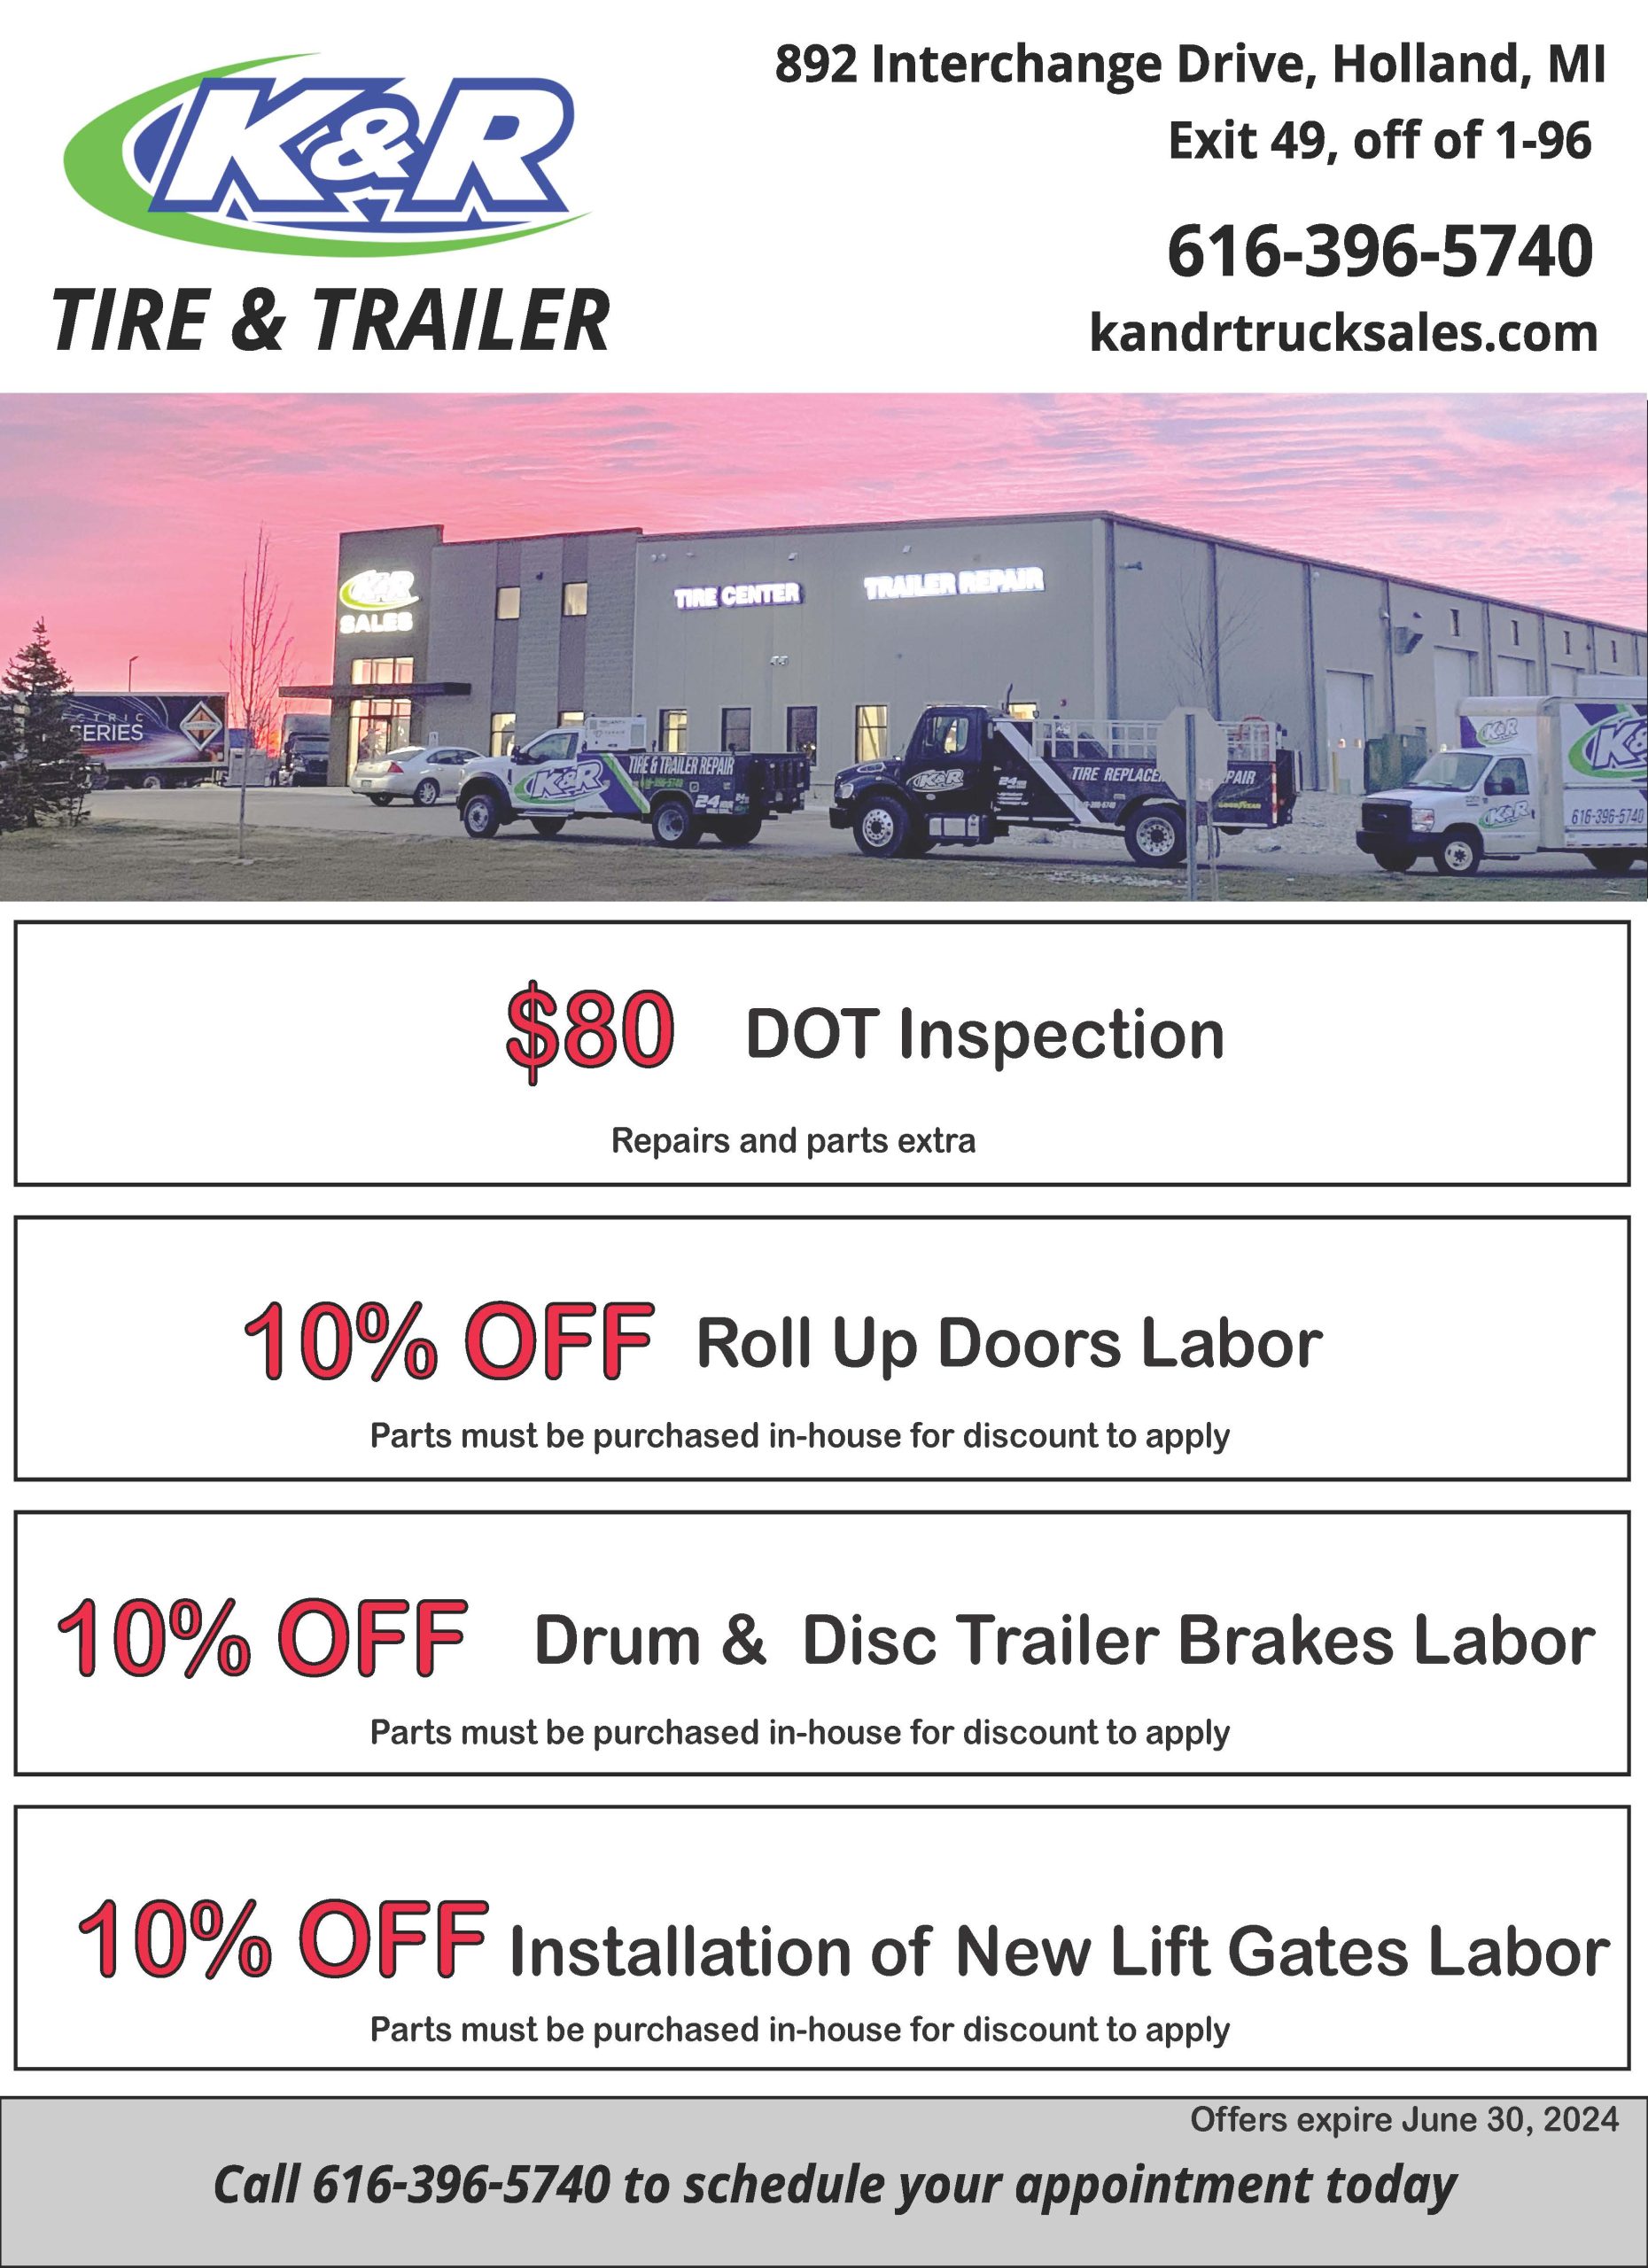 May June Tire and Trailer Service